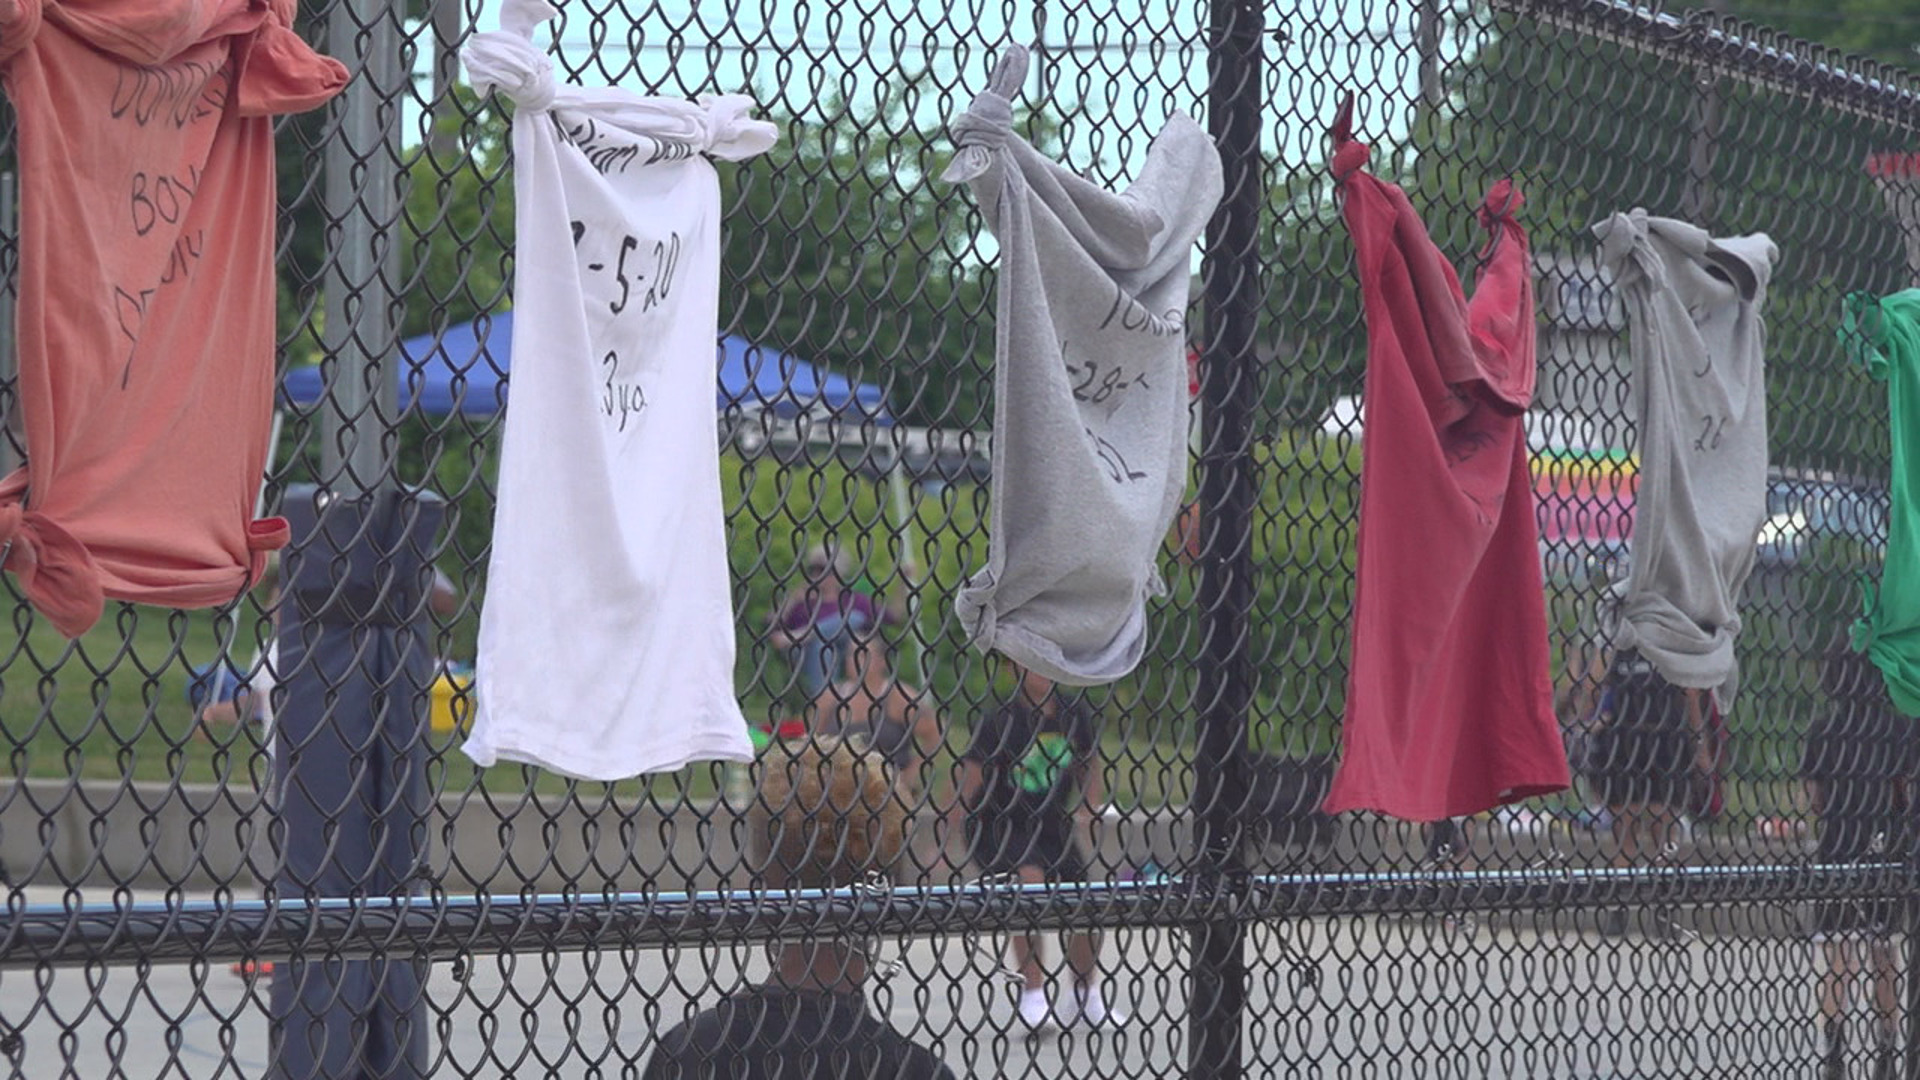 The event honored the memories of people who lost their lives due to gun violence in Lancaster County.